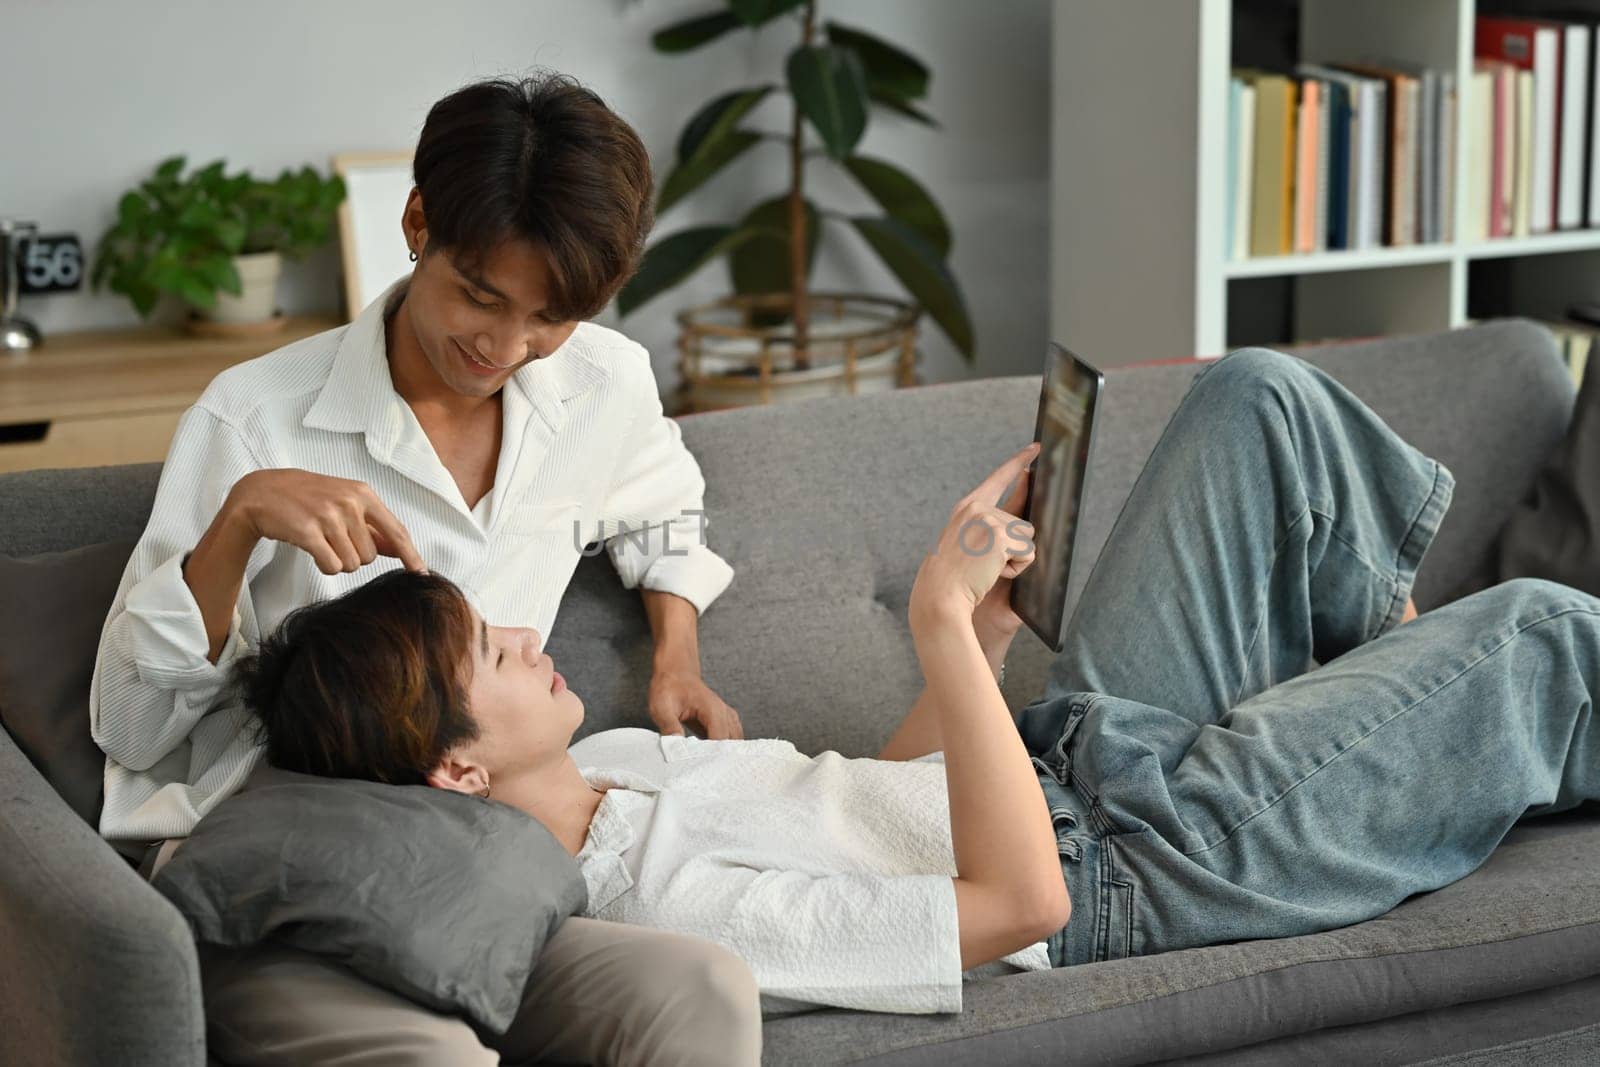 Loving homosexual couple embracing and using digital tablet on couch. LGBT, love and lifestyle relationship concept by prathanchorruangsak